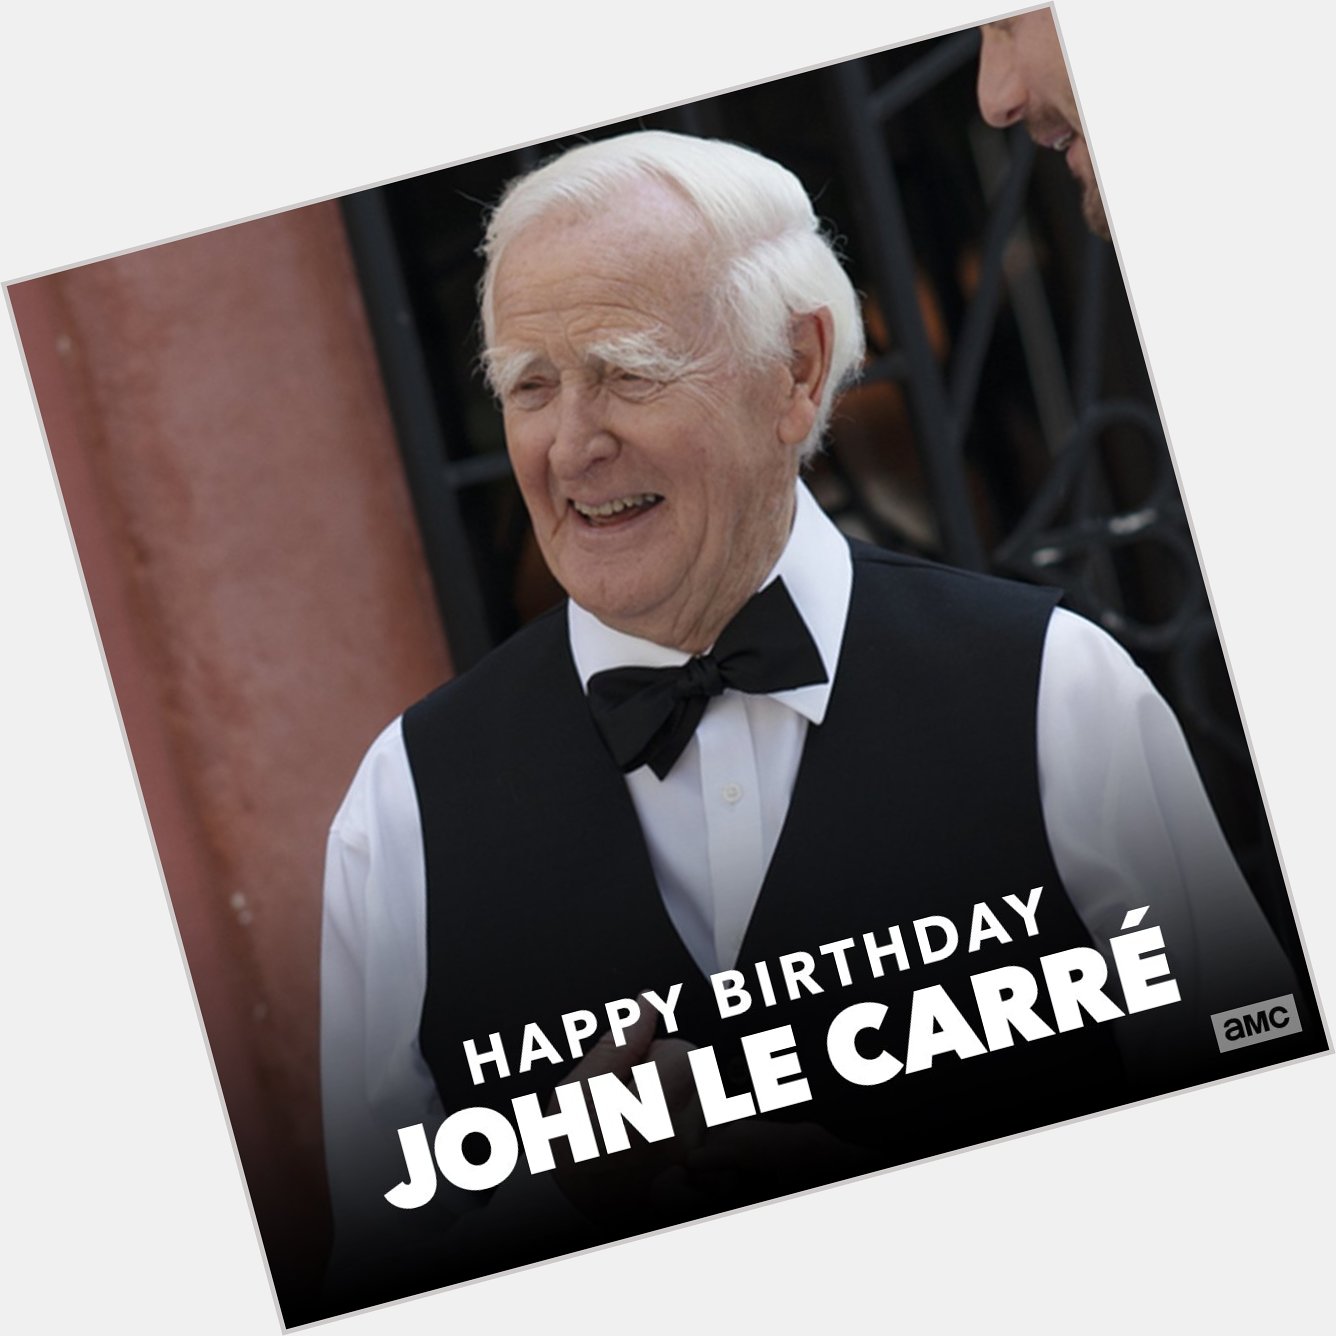 We\d like to furtively wish John le Carré a happy birthday! 